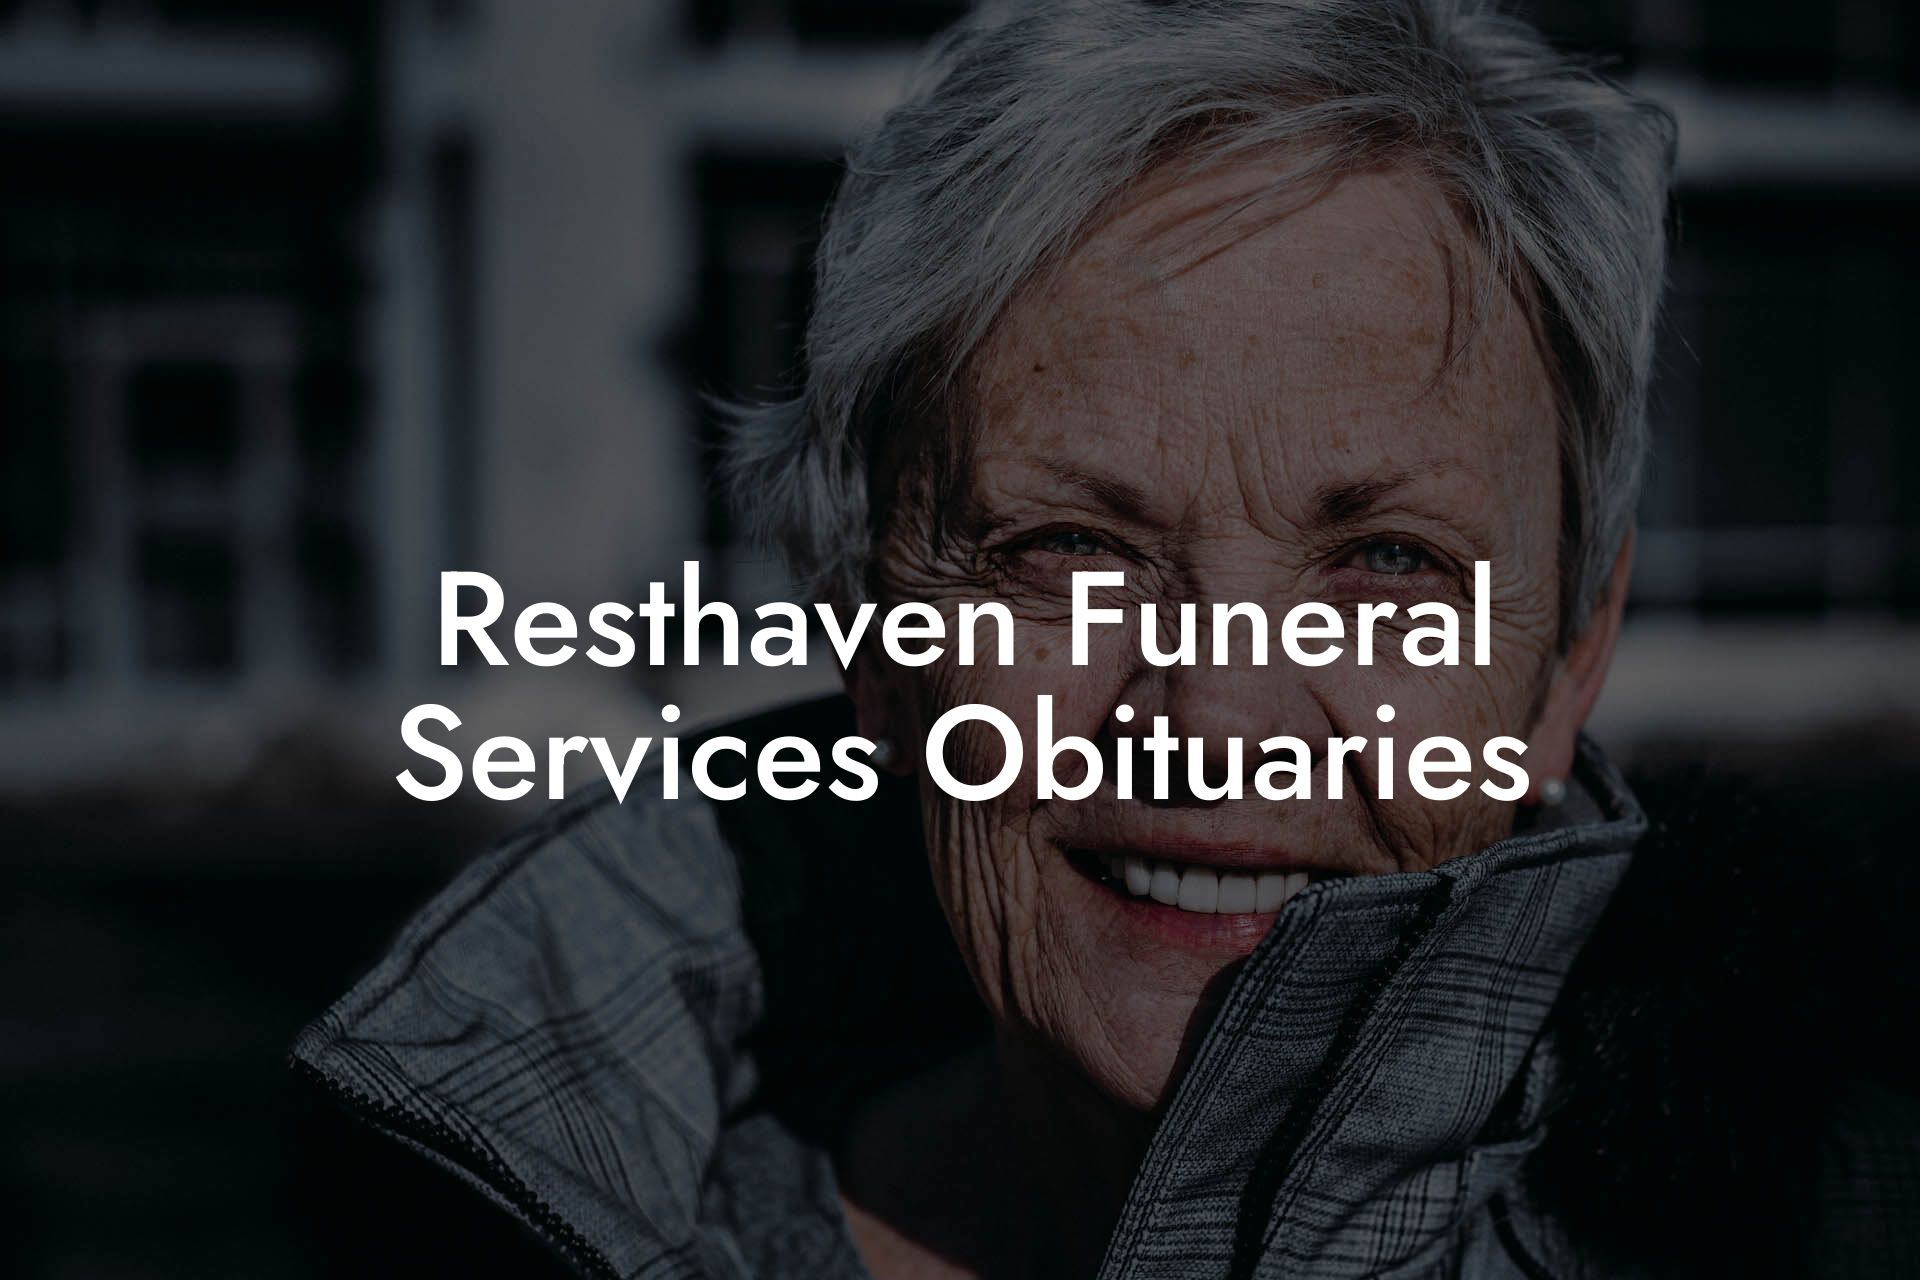 Resthaven Funeral Services Obituaries